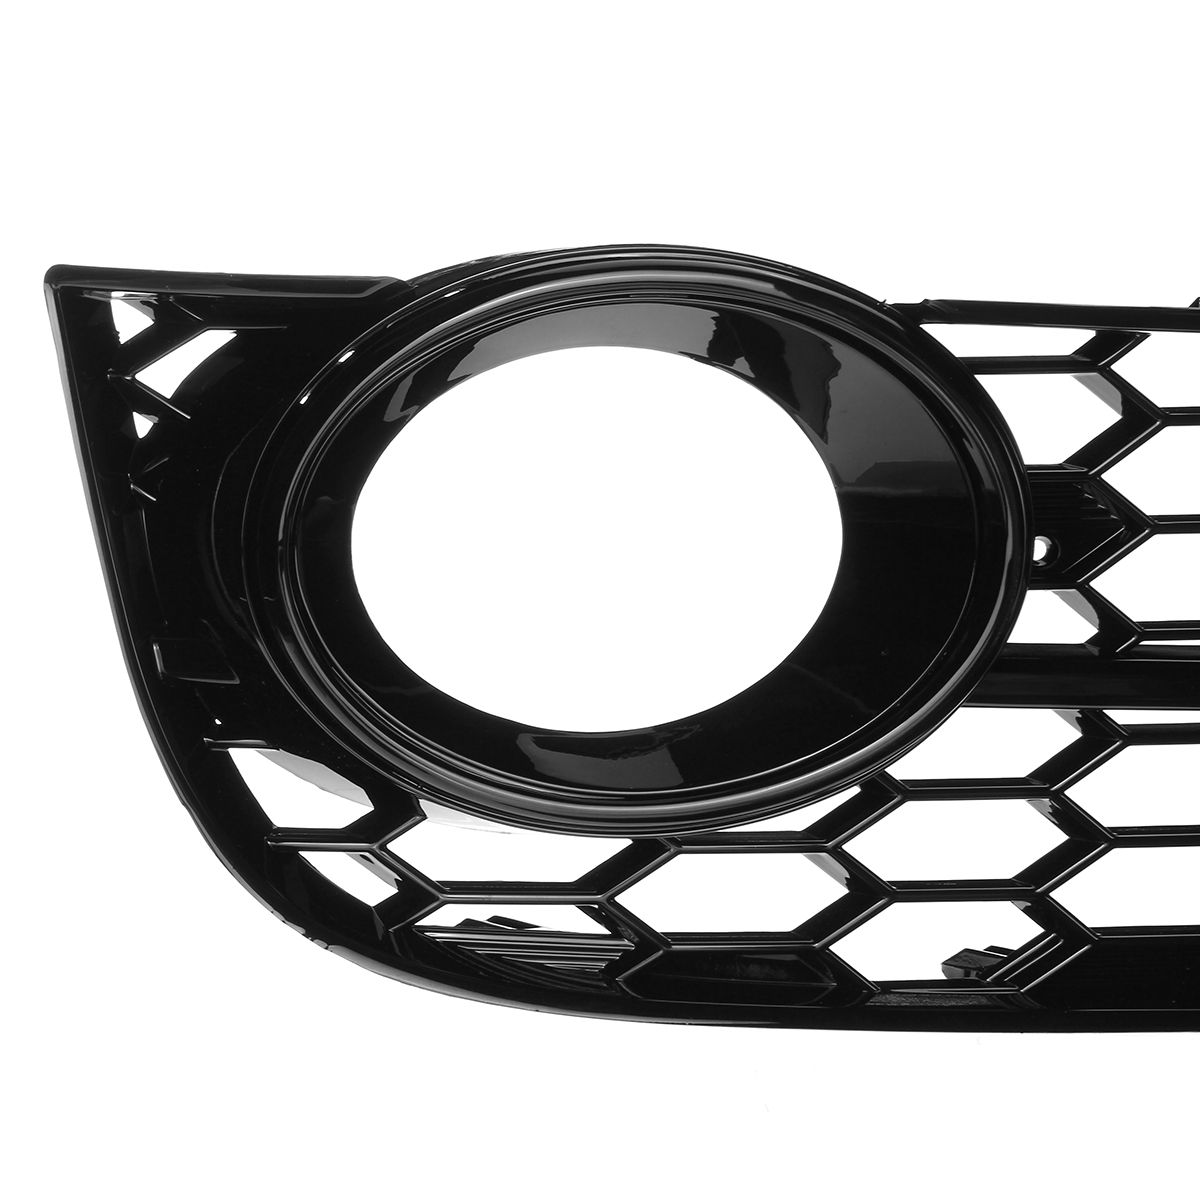 Pair-Front-Bumper-Fog-Light-Lamp-Grille-Grill-Cover-Honeycomb-Hex-Black-For-Audi-A5-2008-2011-1561544